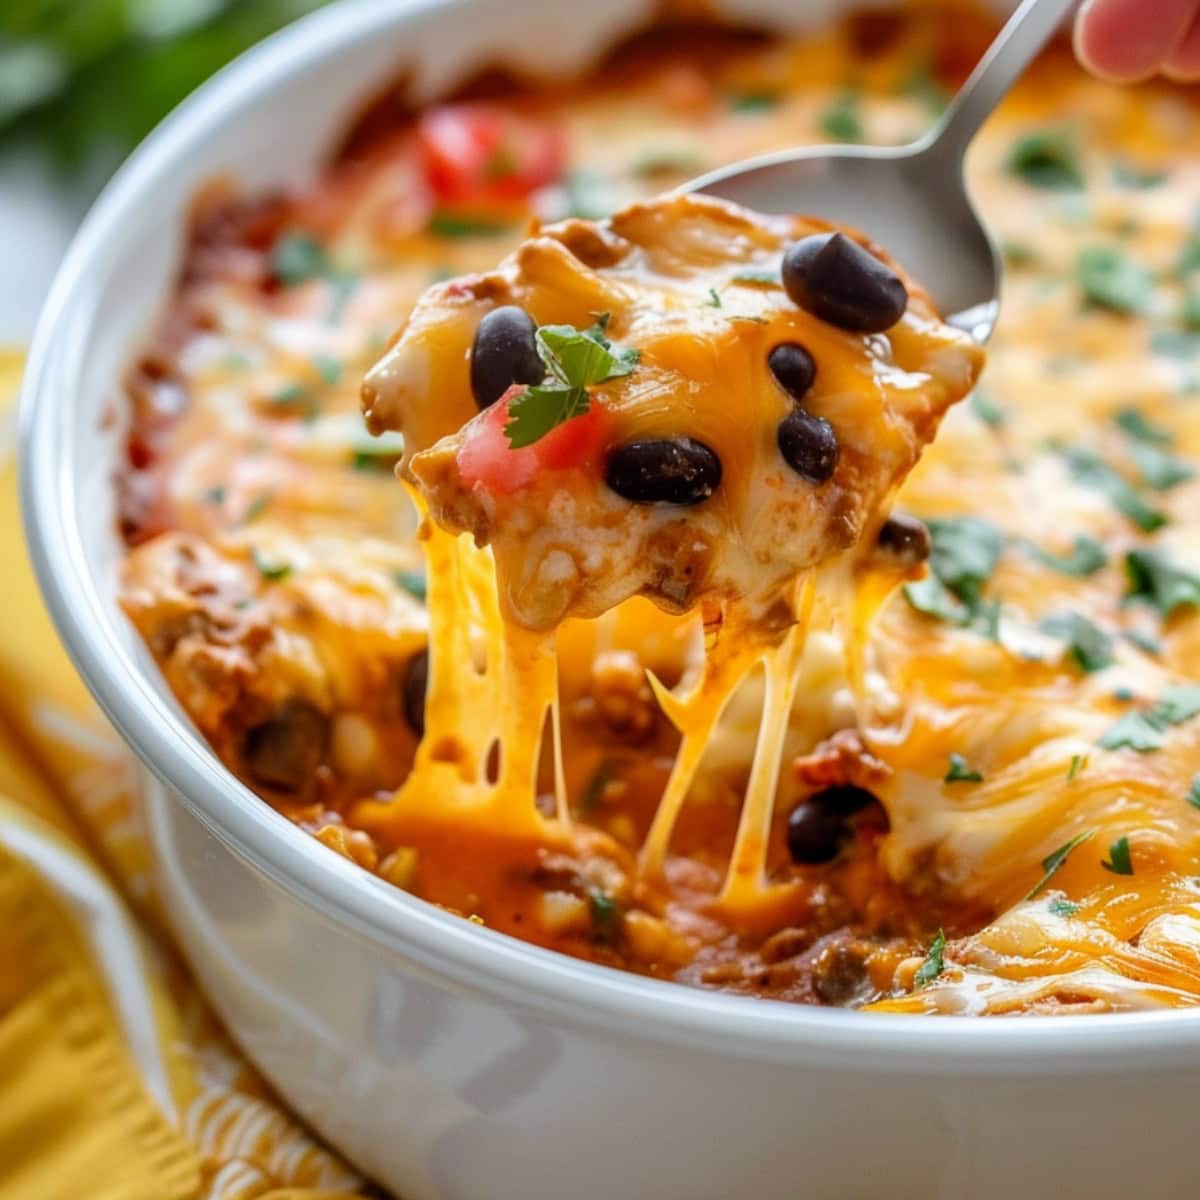 Spoonful of chili cheese dip.